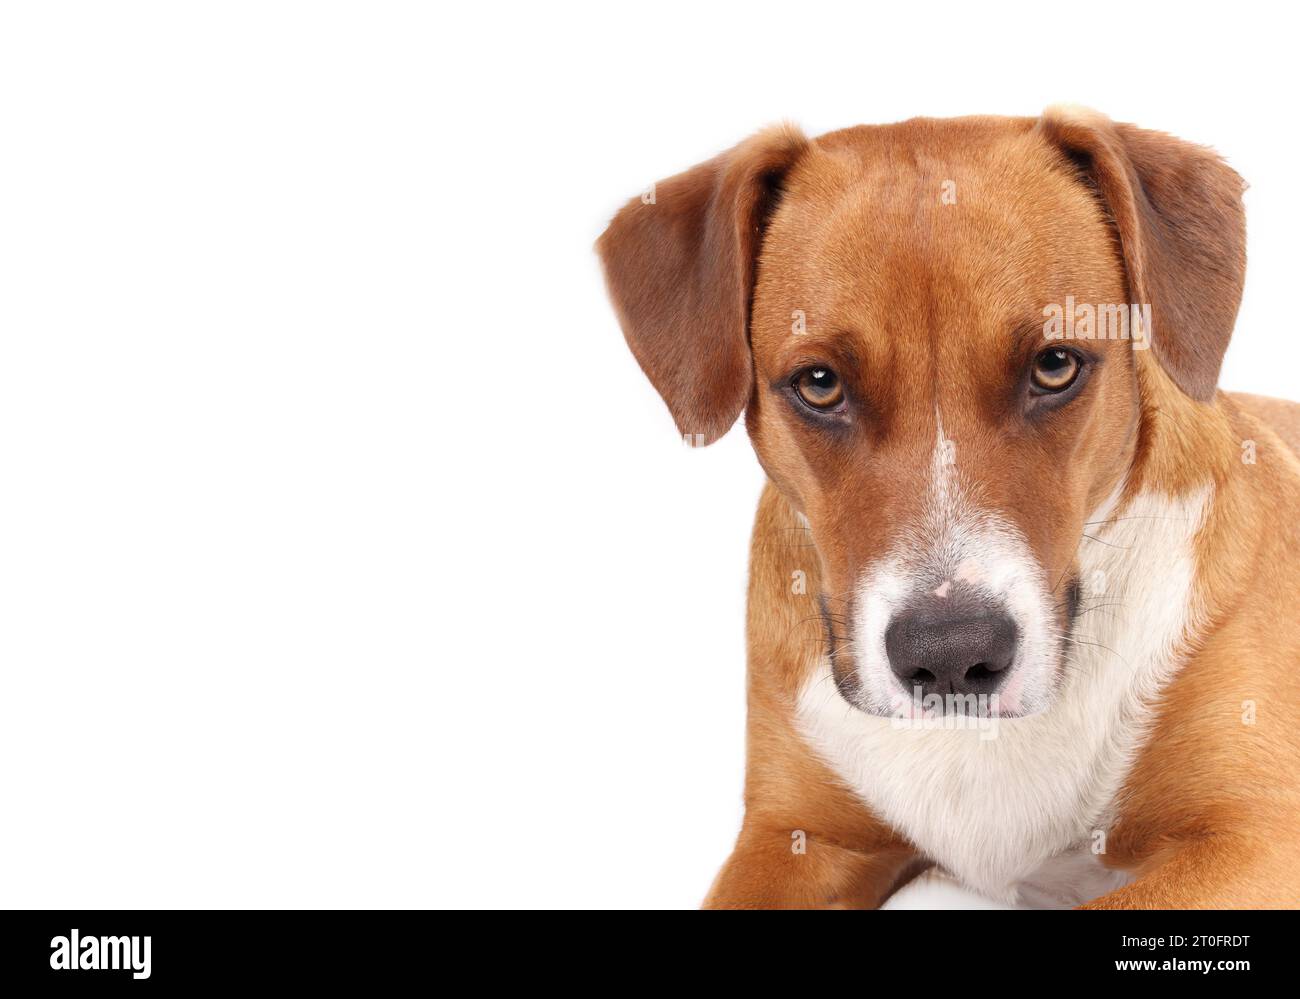 Brown dog looking at camera with  serious, concentrated or intense look. Isolated head shot of puppy dog with floppy ears. 1 year old female Harrier m Stock Photo